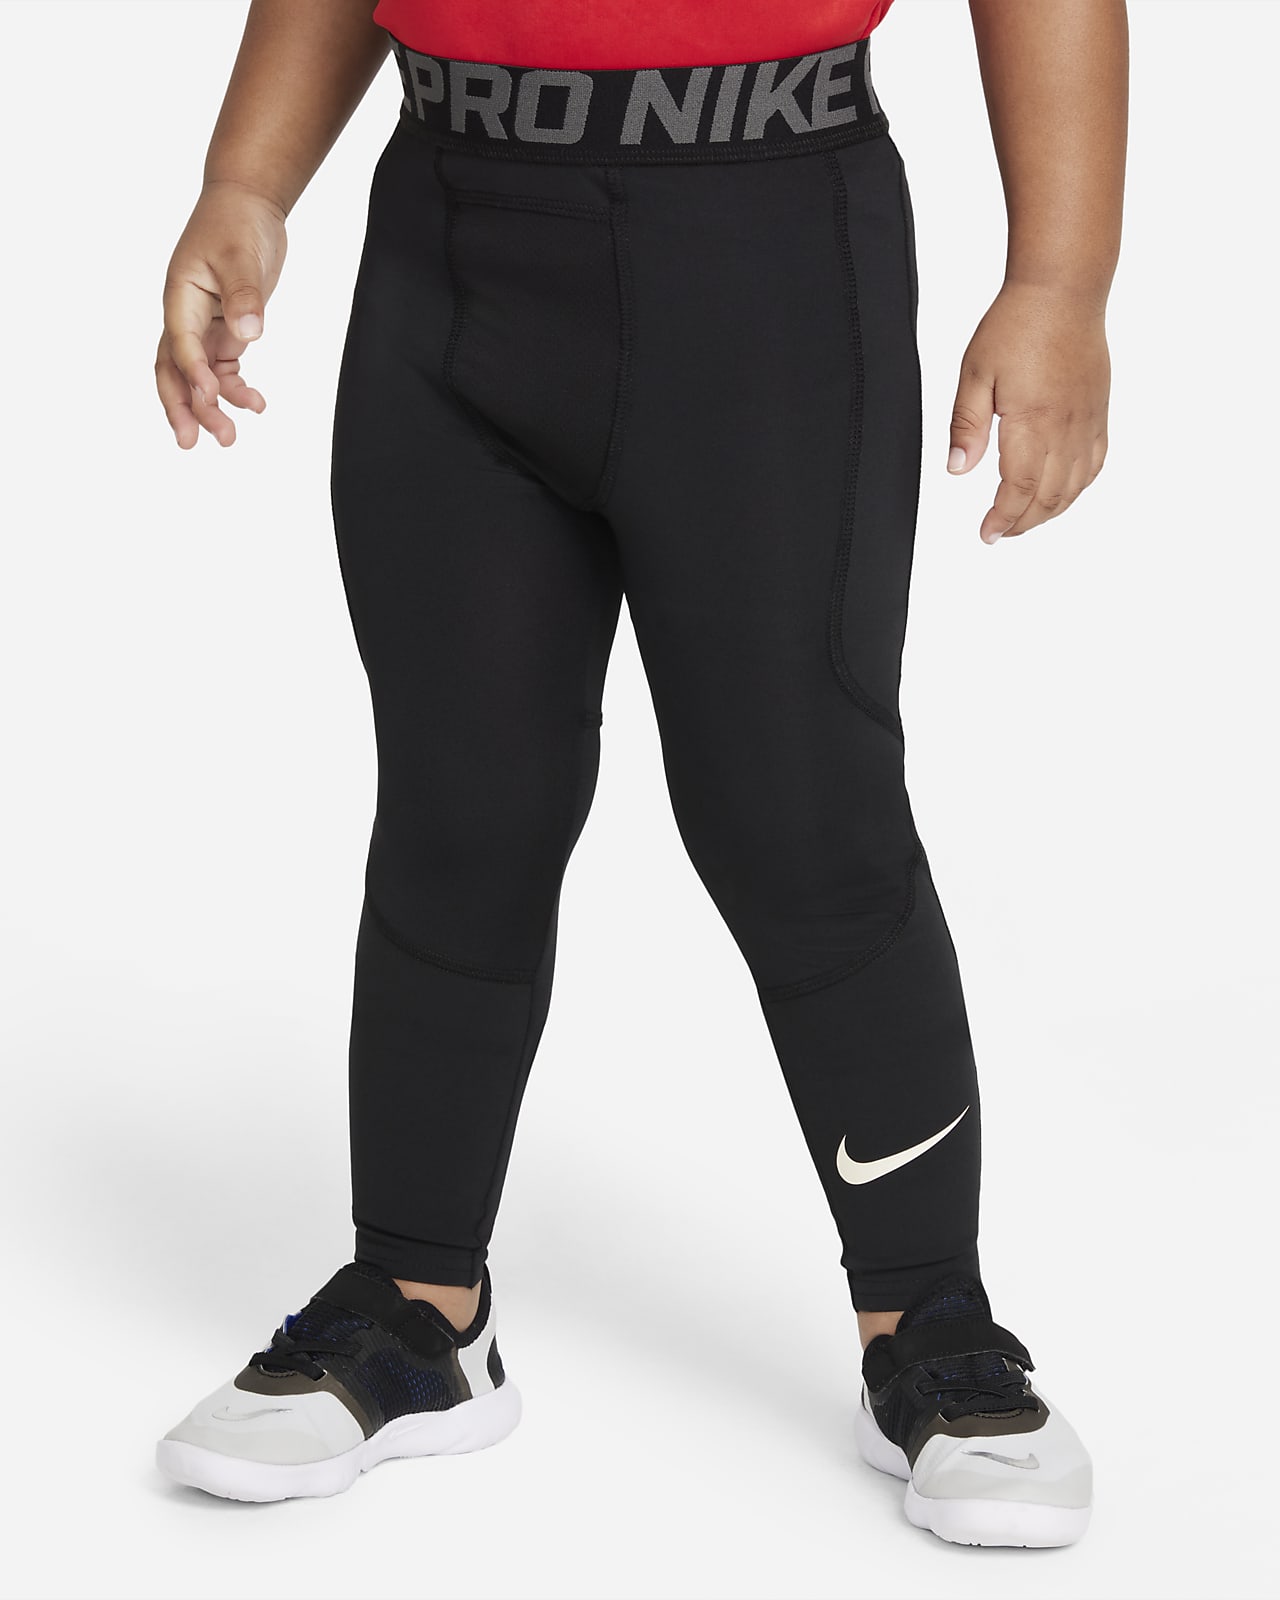 Stay comfortable and stylish with Nike Pro HyperWarm Leggings